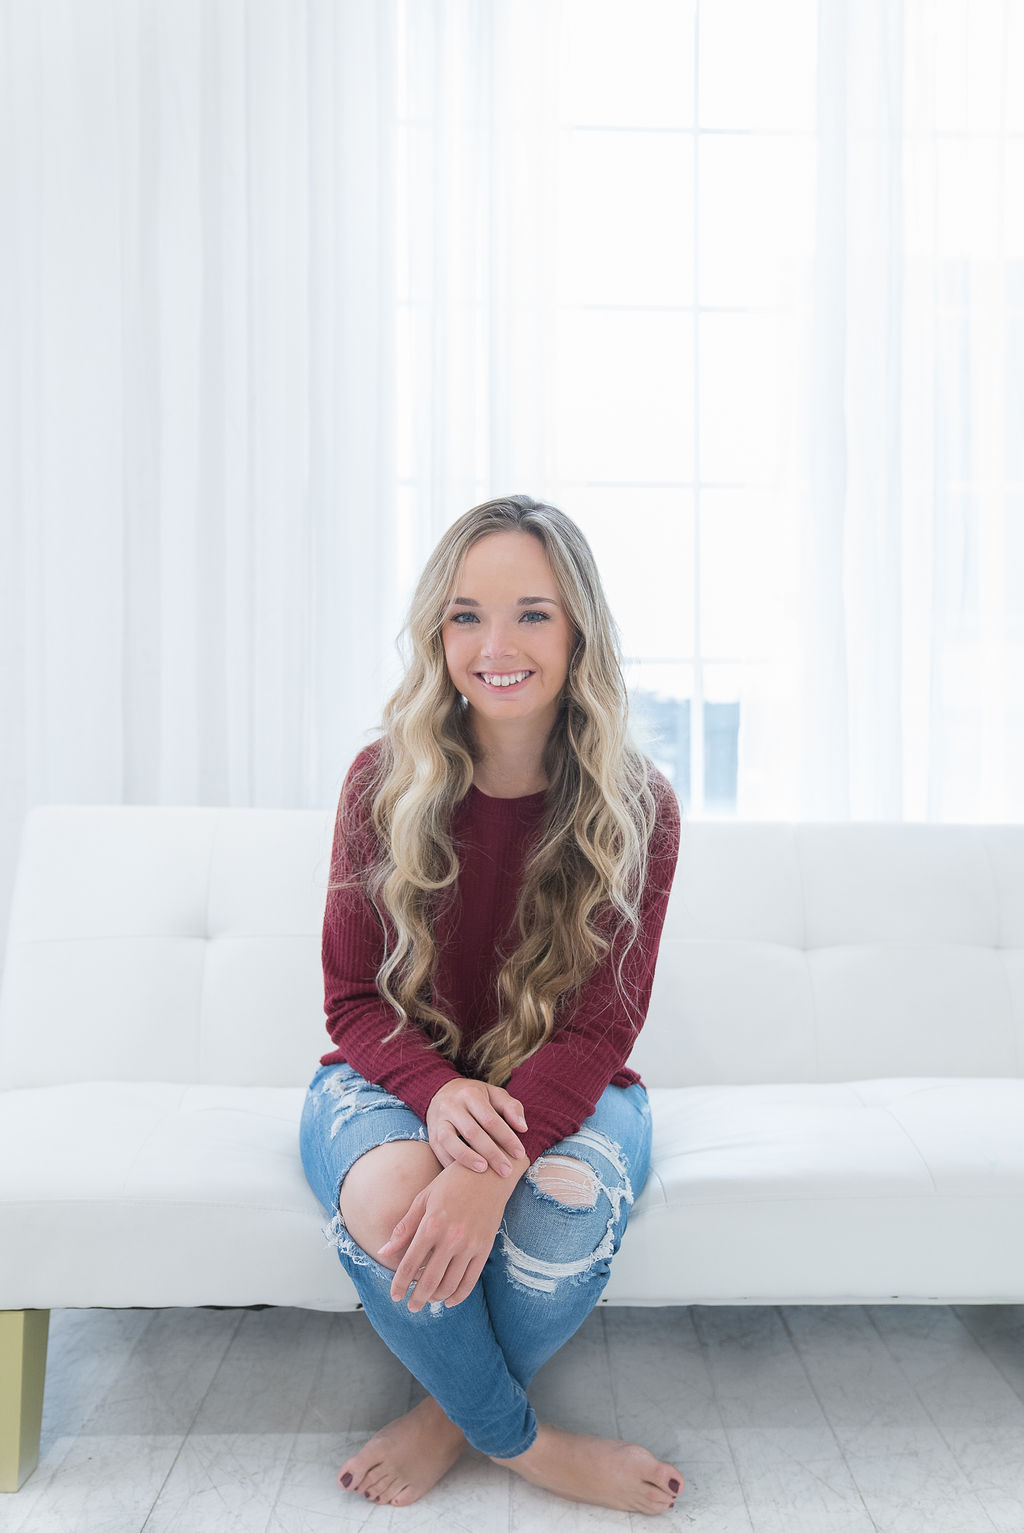 image of Amber Broder sitting on couch and smiling at camera wearing red sweater and ripped jeans